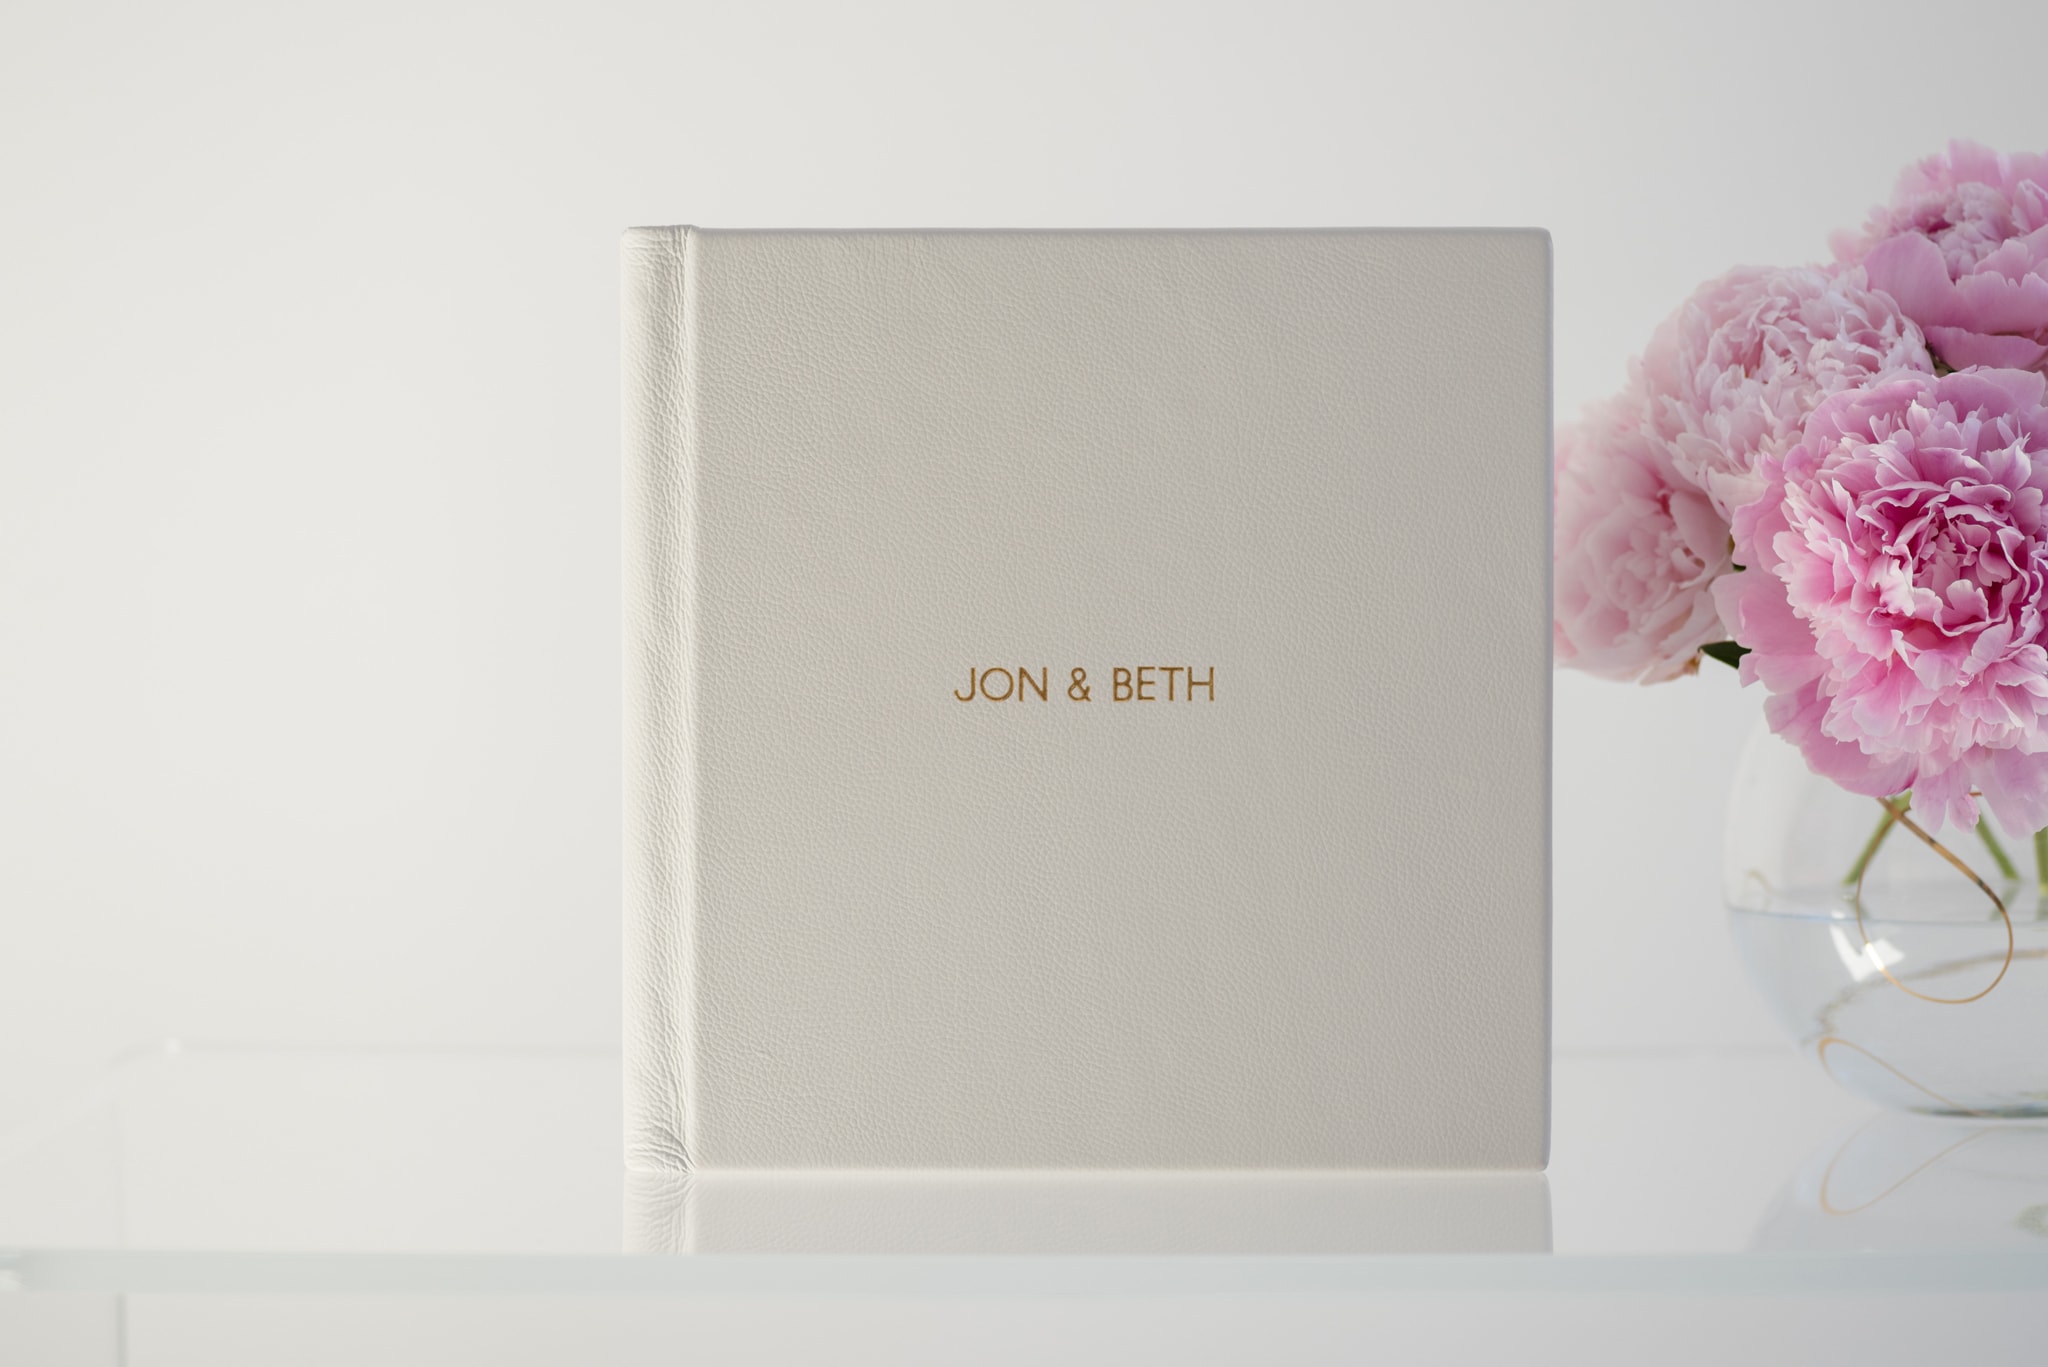 Pale grey square fine art wedding photo album propped up on a coffee table next to a vase of pink peonies